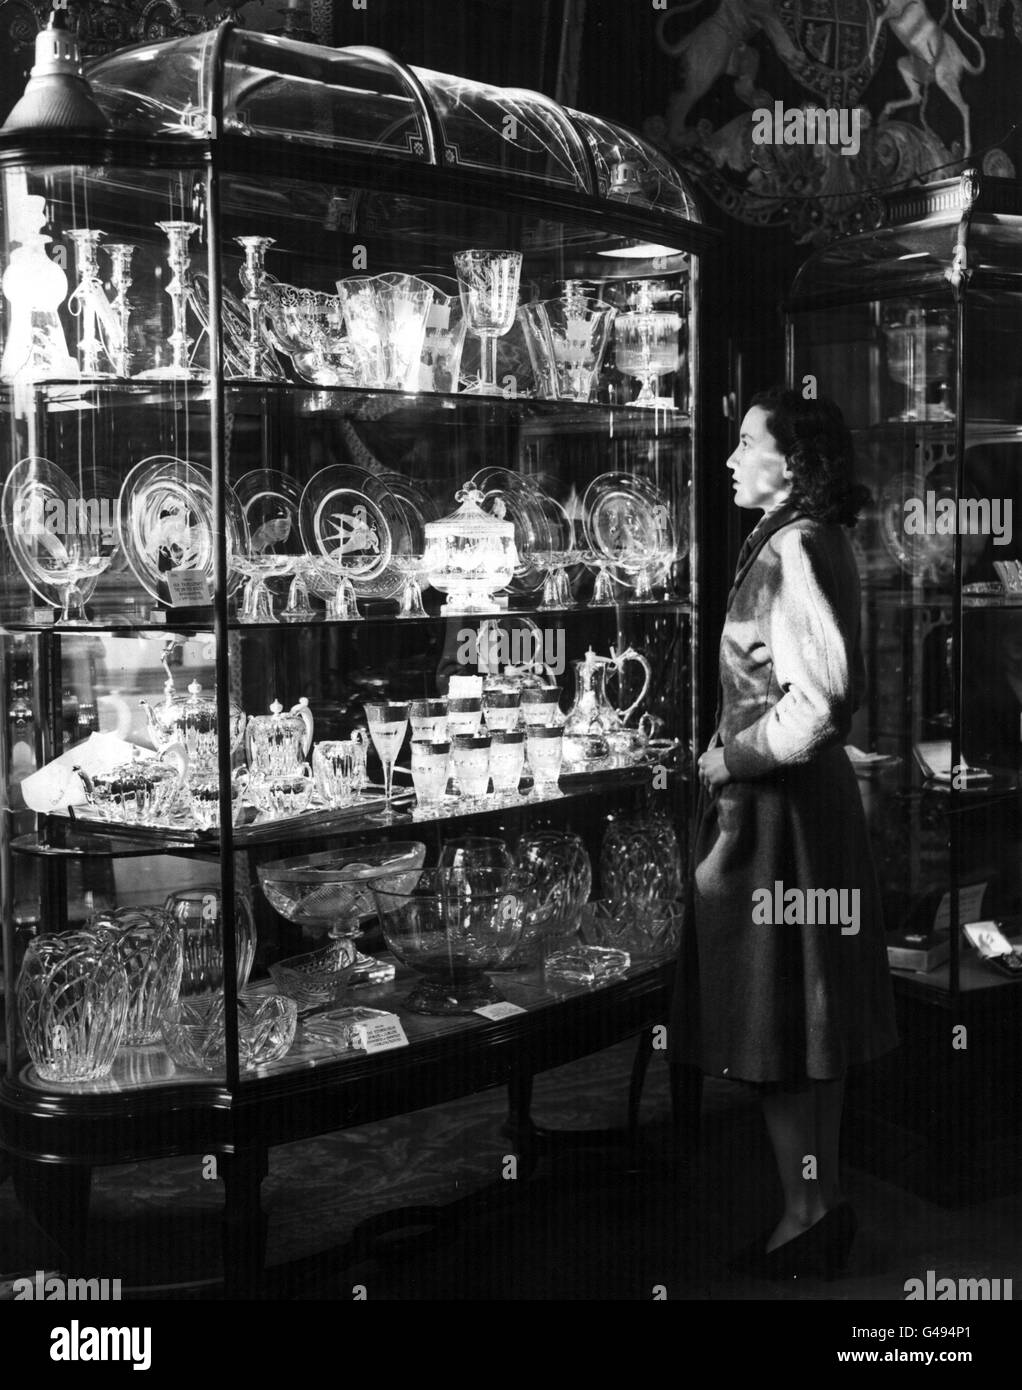 PA NEWS PHOTO 17/11/47 CABINET OF CUT GLASS WEDDING GIFTS AT ST.JAMES PALACE WHICH WERE GIVING TO THE QUEEN AFTER SHE MARRIED THE DUKE OF EDINBURGH Stock Photo